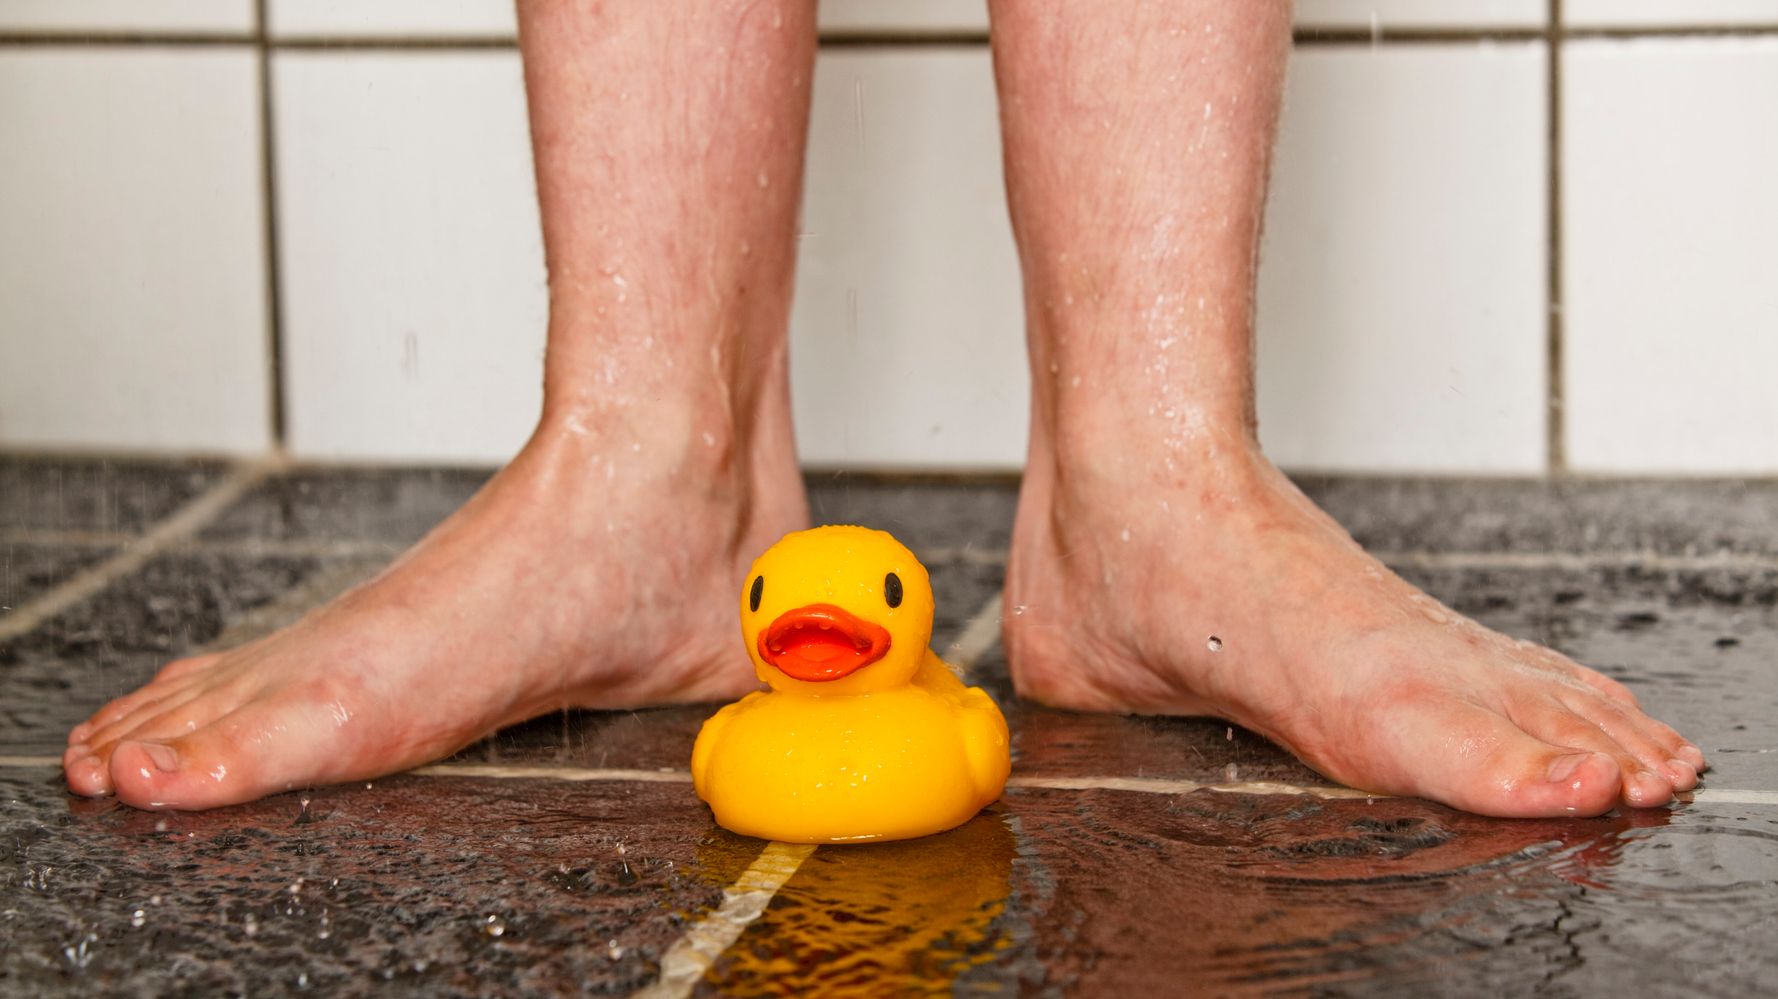 Does Peeing in the Shower May Treat Athlete's Foot